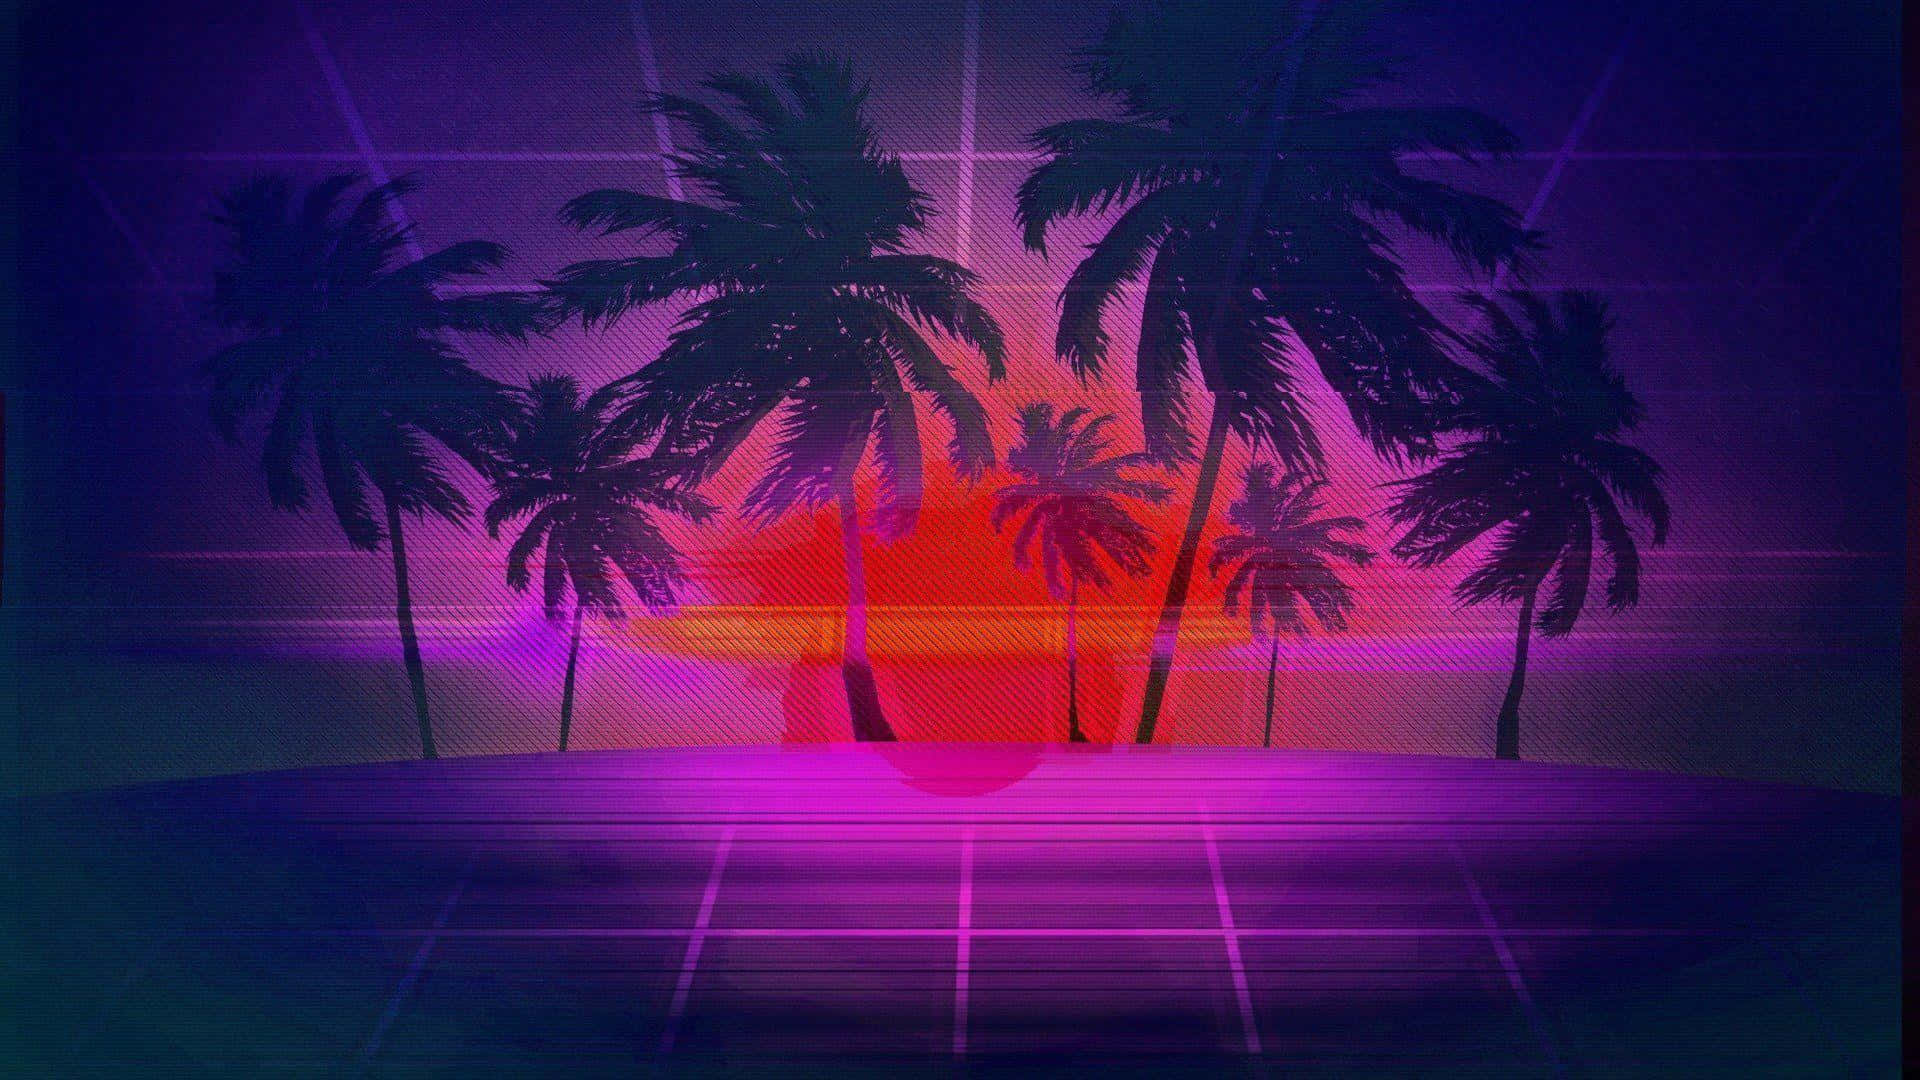 "Welcome to the Fantasia of Vaporwave"